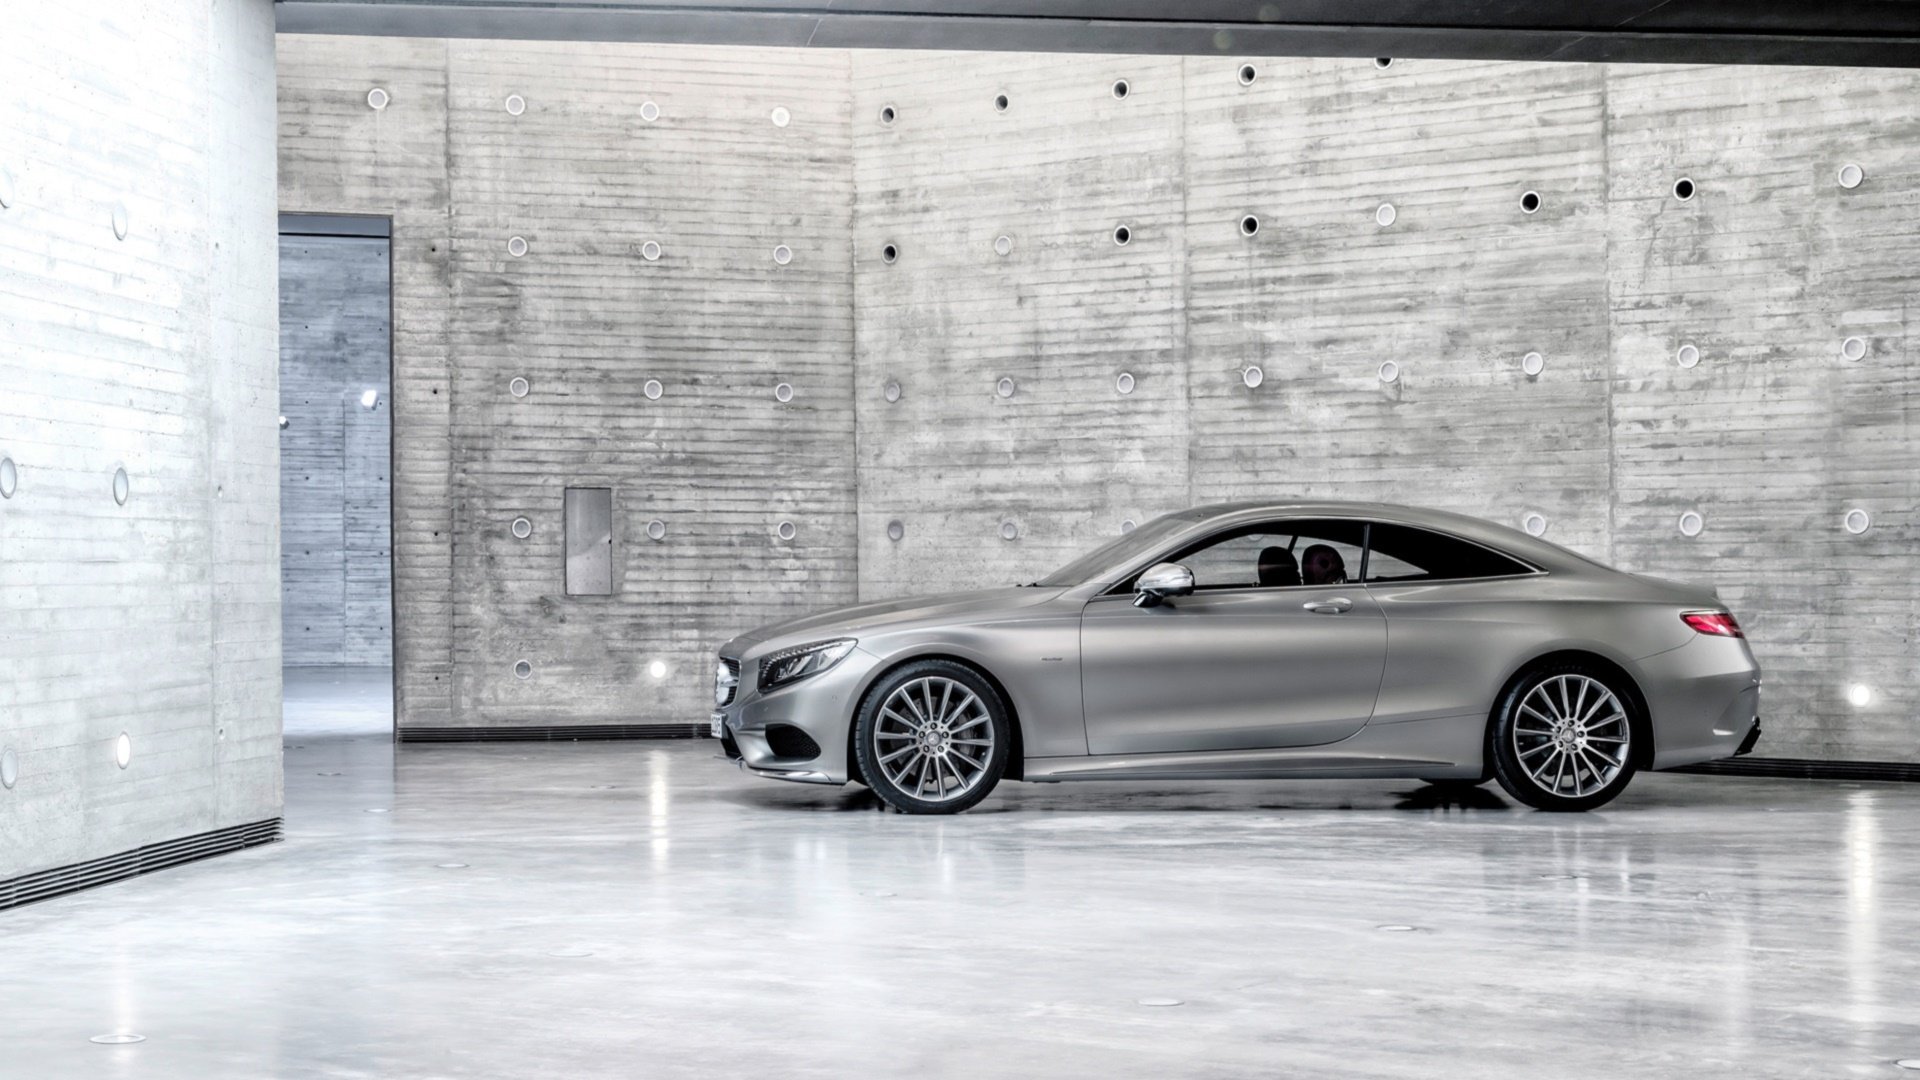 Download full hd Mercedes-Benz S-Class Coupe desktop background ID:21690 for free